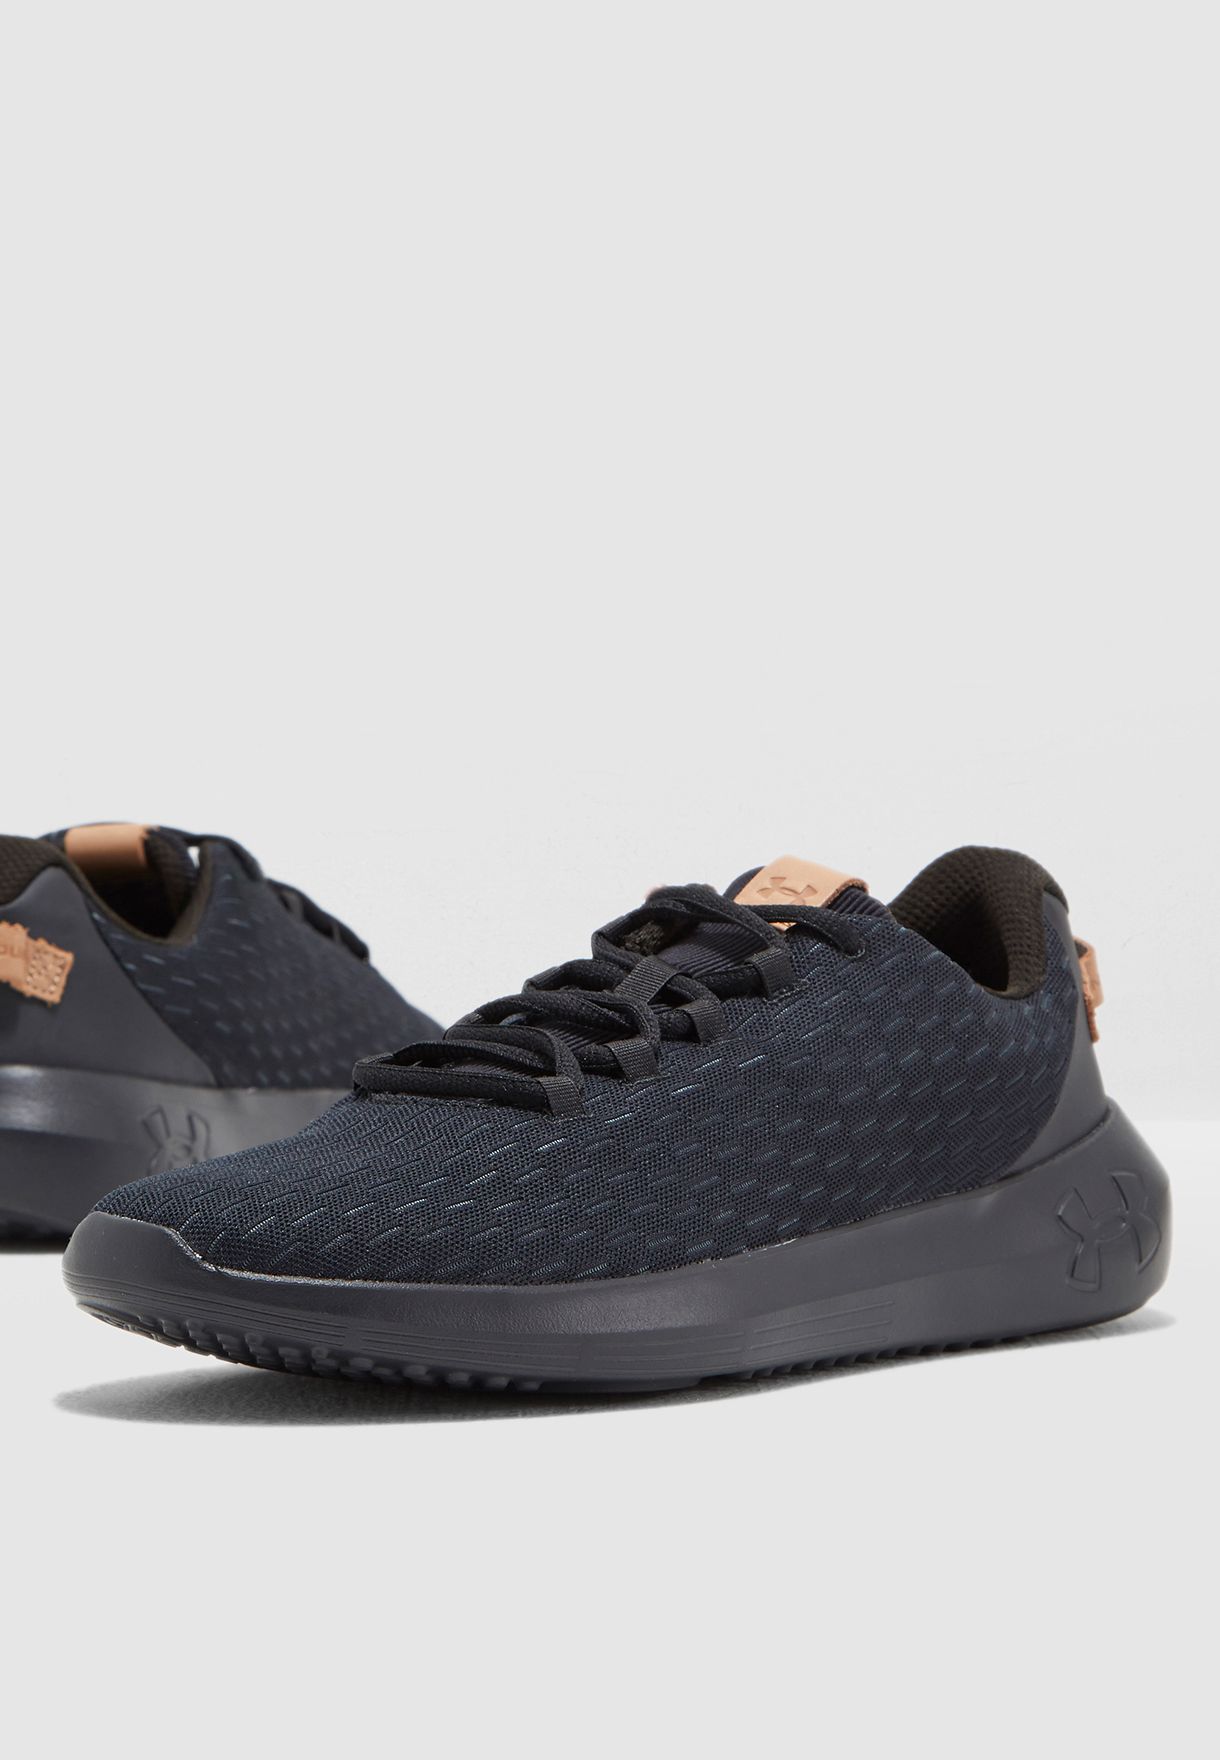 Under Armour Mens Ripple Elevated Sneaker